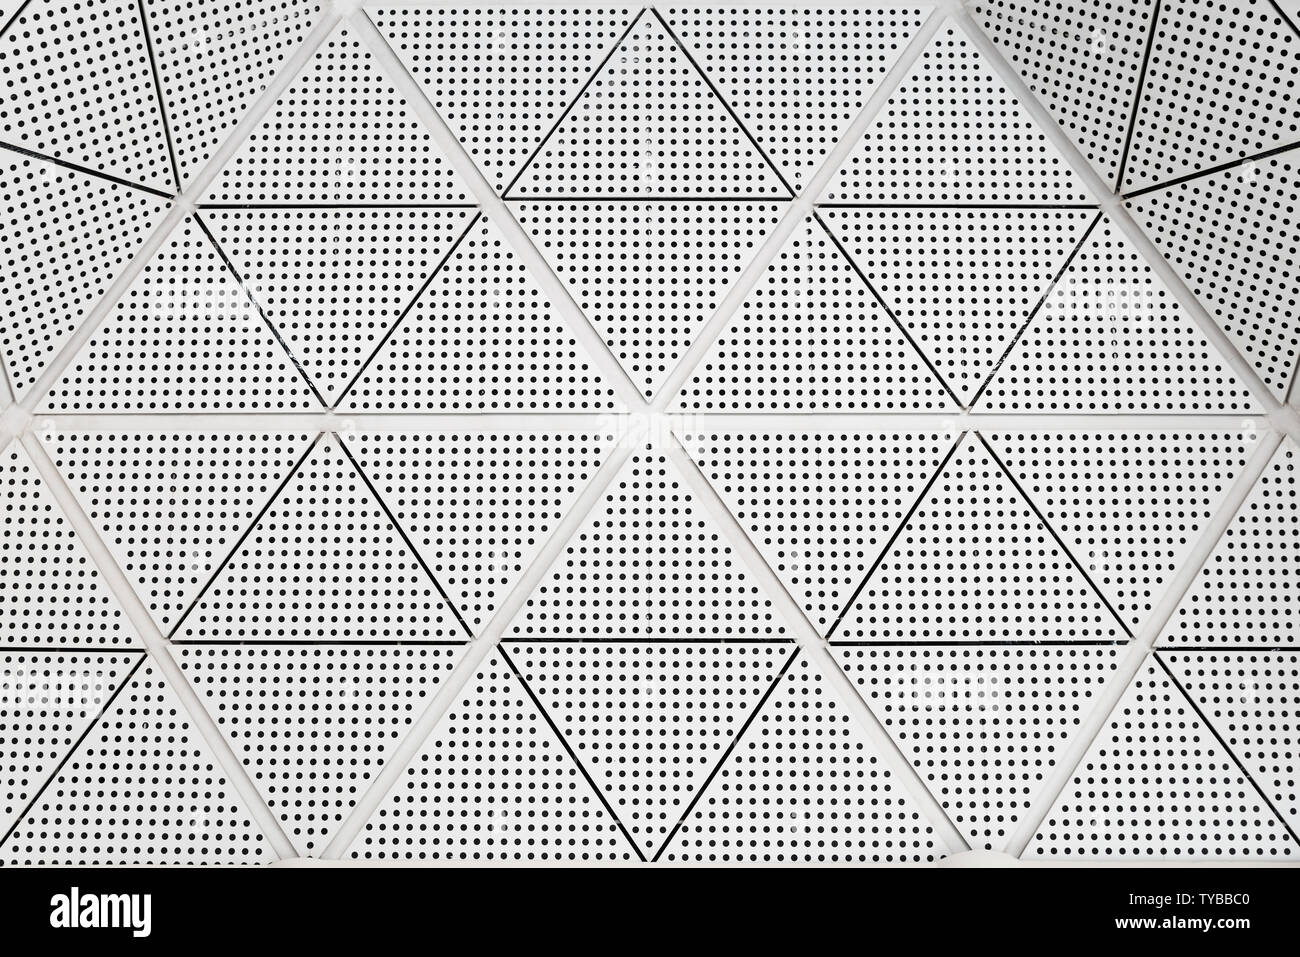 Modern metal ceiling dotted pattern Stock Photo